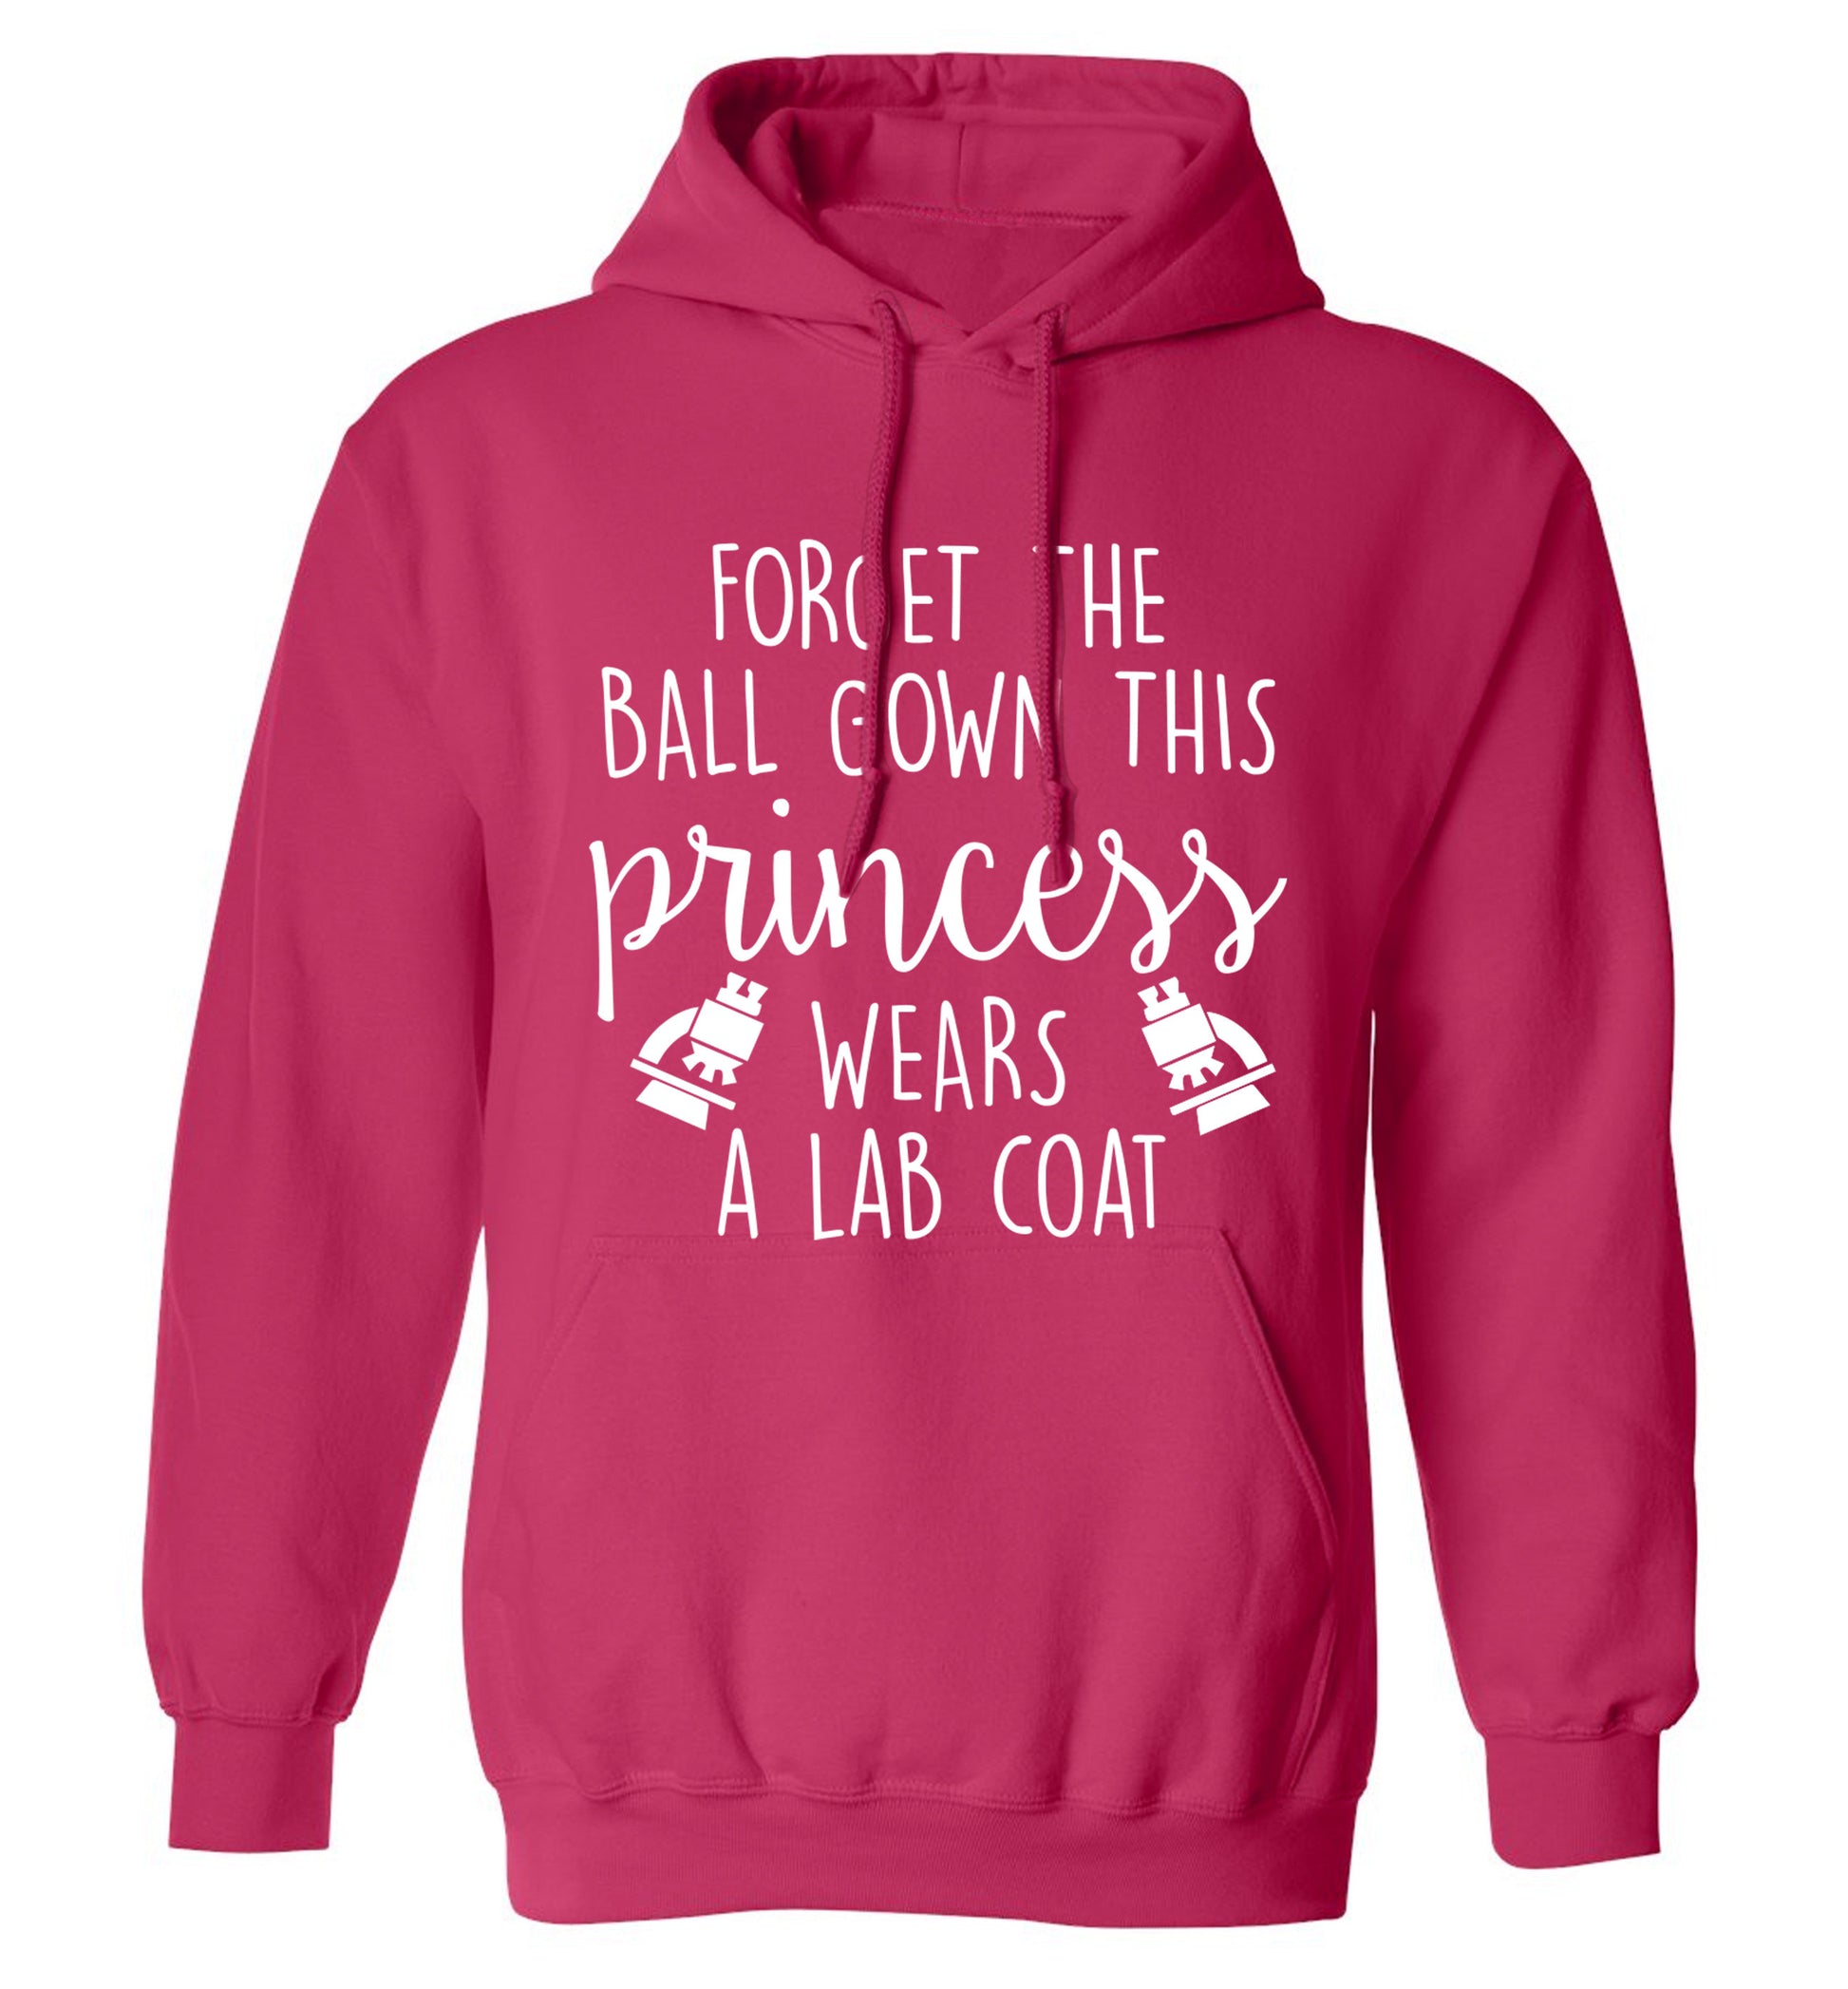 Forget the ball gown this princess wears a lab coat adults unisex pink hoodie 2XL